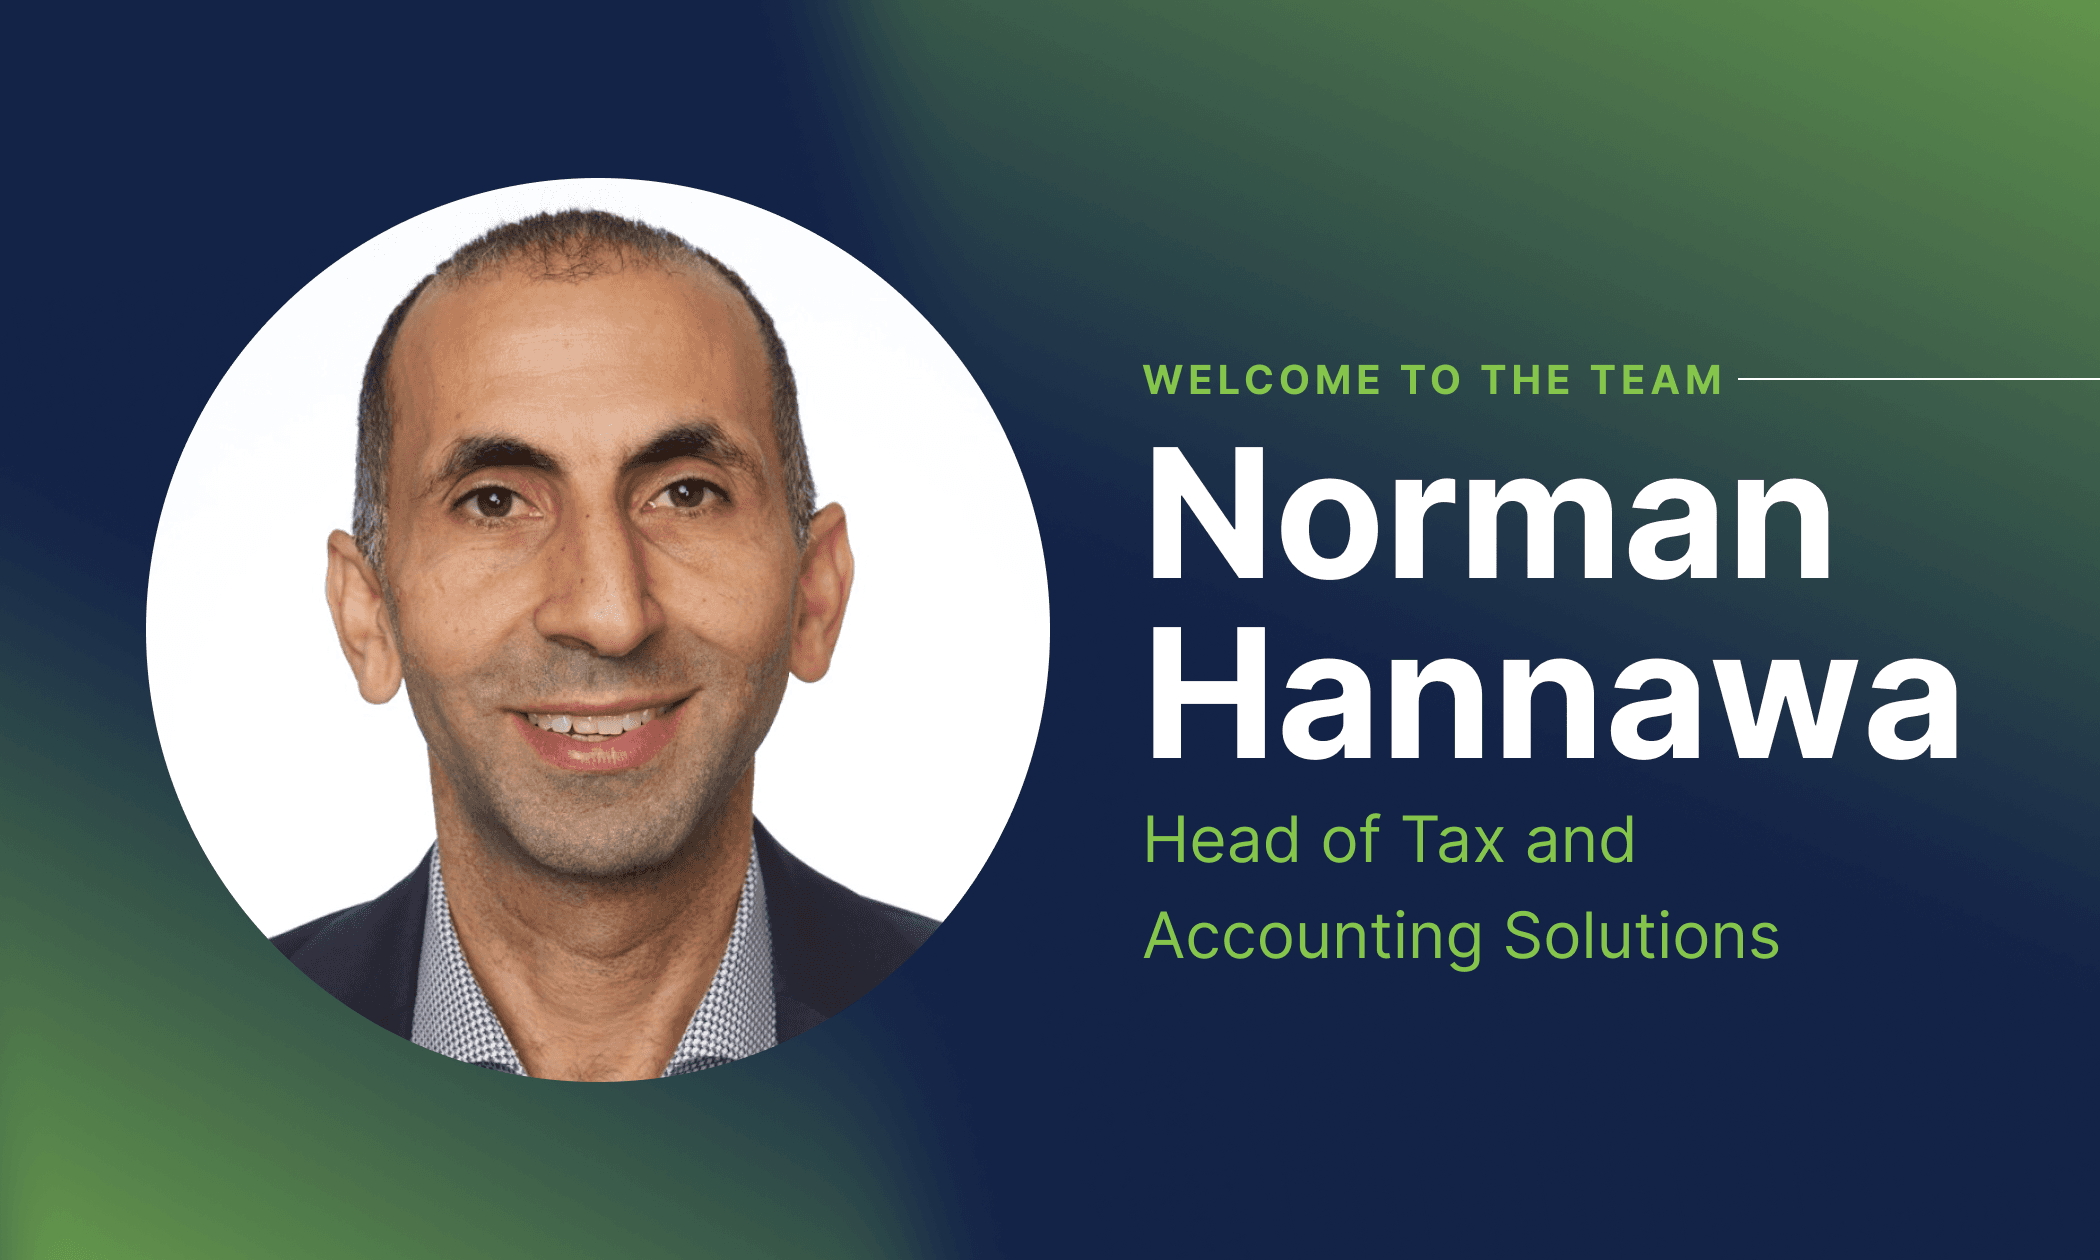 Former Director of Tax Strategy at Chainalysis Norman Hannawa joins NODE40 as Head of Tax and Accounting Solutions